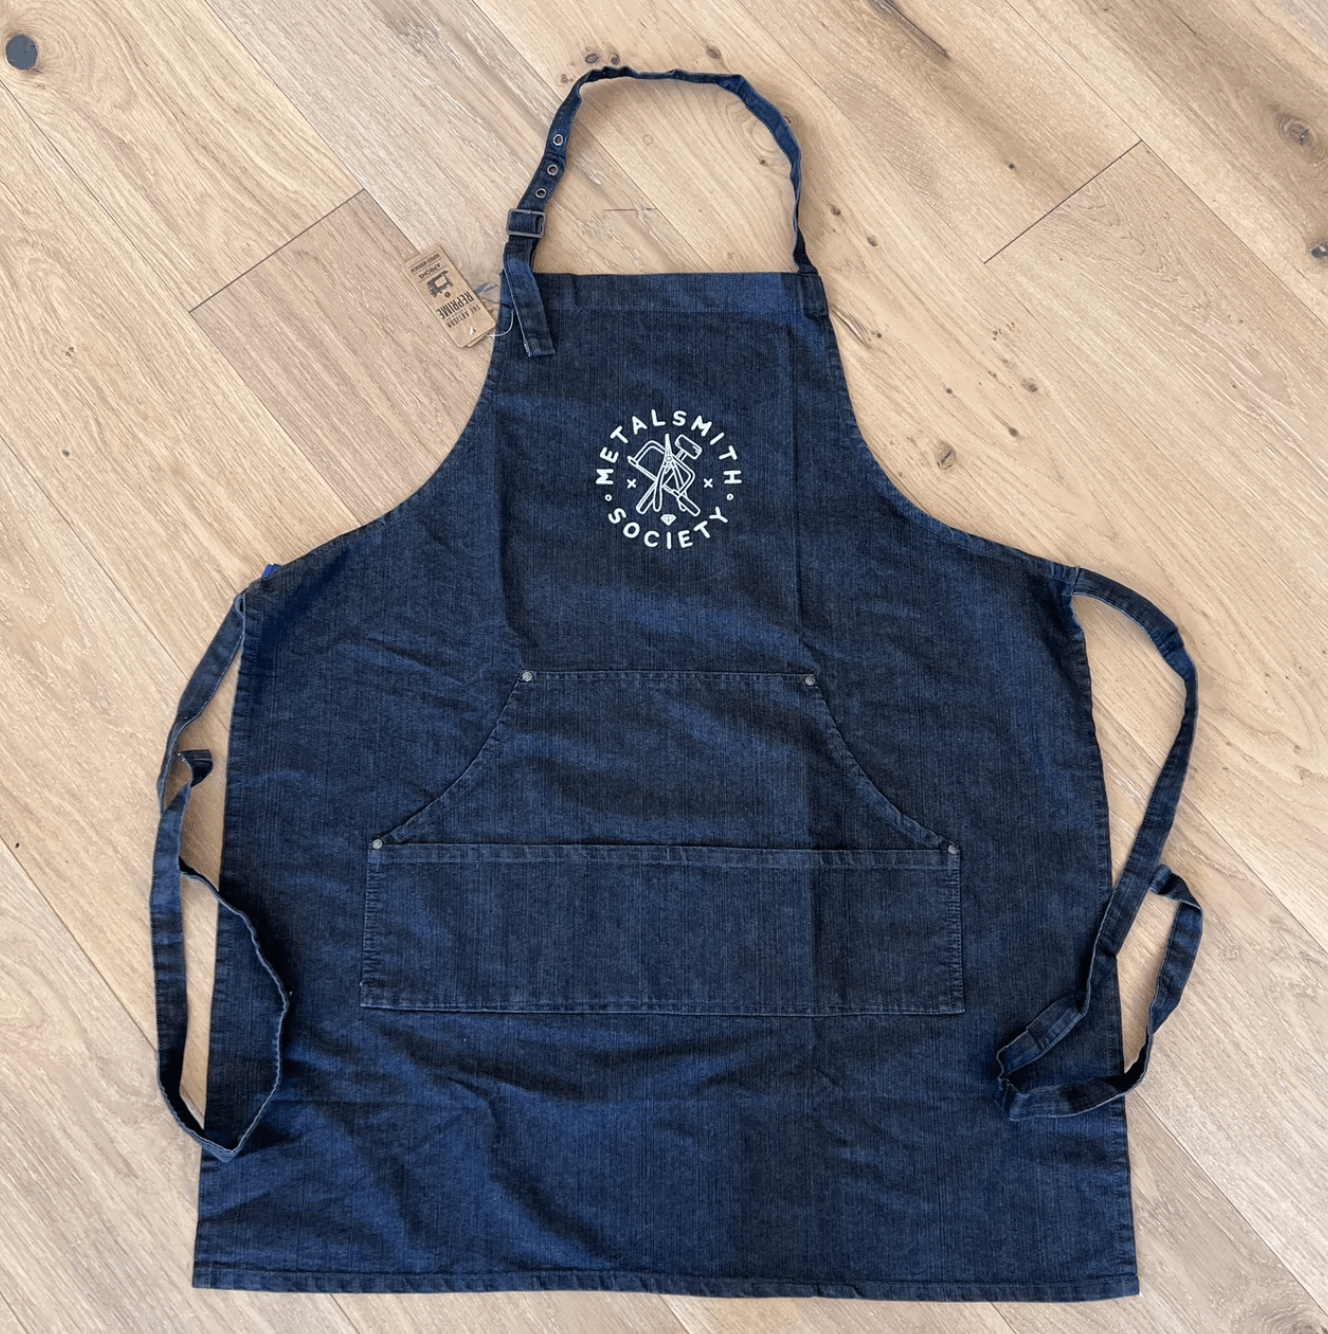 Metalsmith Society Embroidered Apron